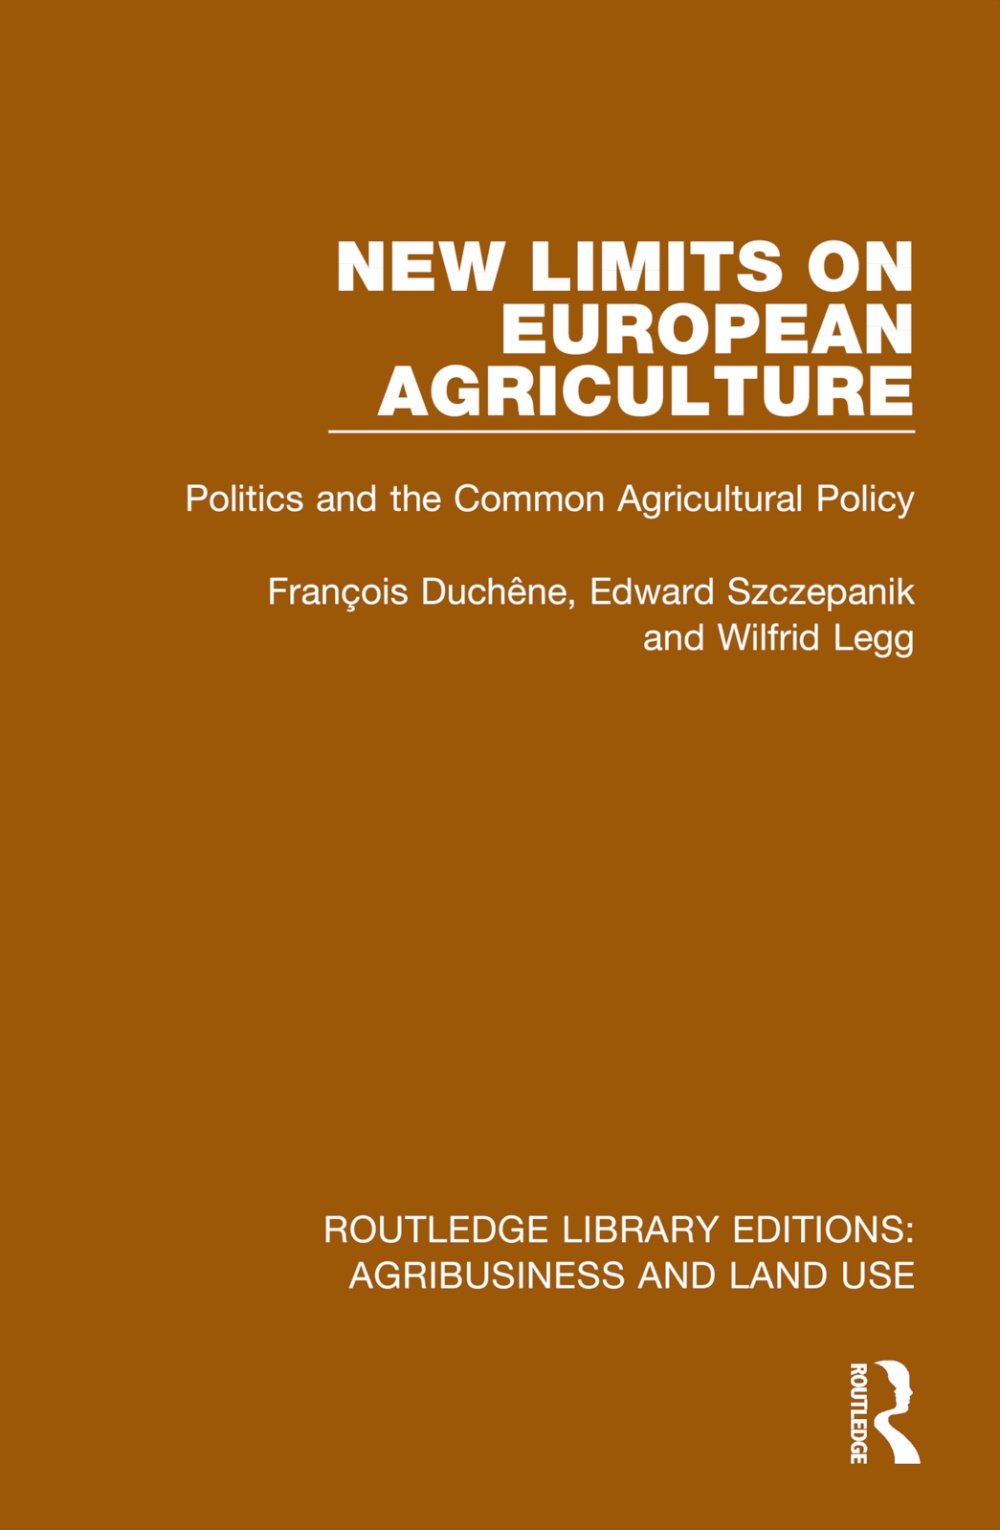 New Limits on European Agriculture: Politics and the Common Agricultural Policy